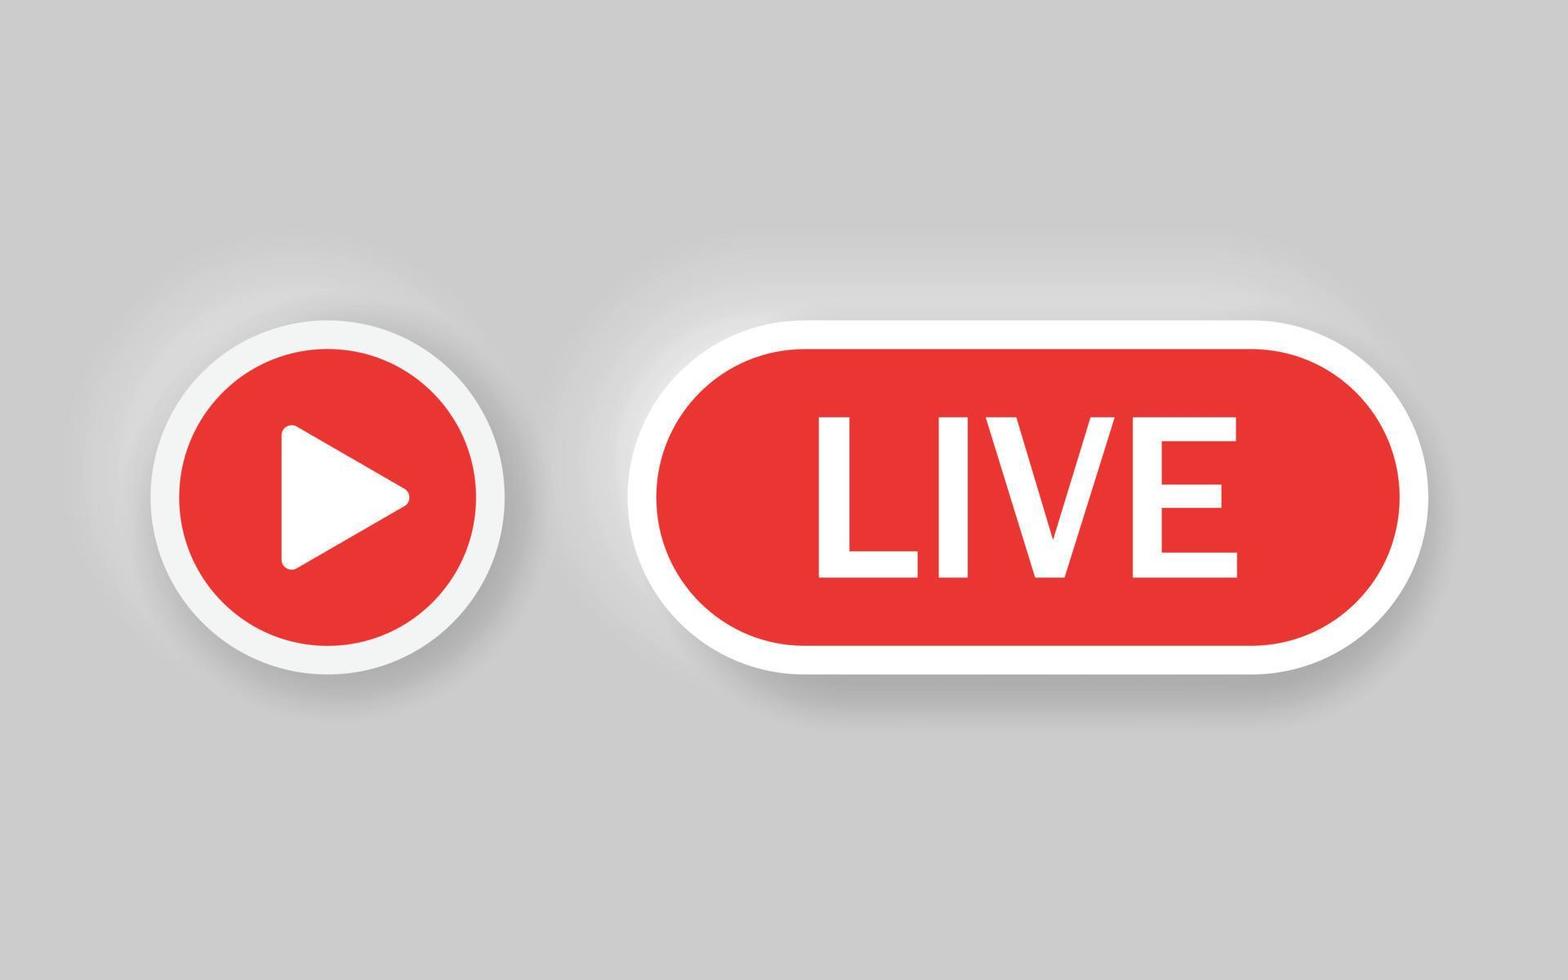 Live stream icon in flat style. Play button vector illustration on isolated background. Video player banner sign business concept.